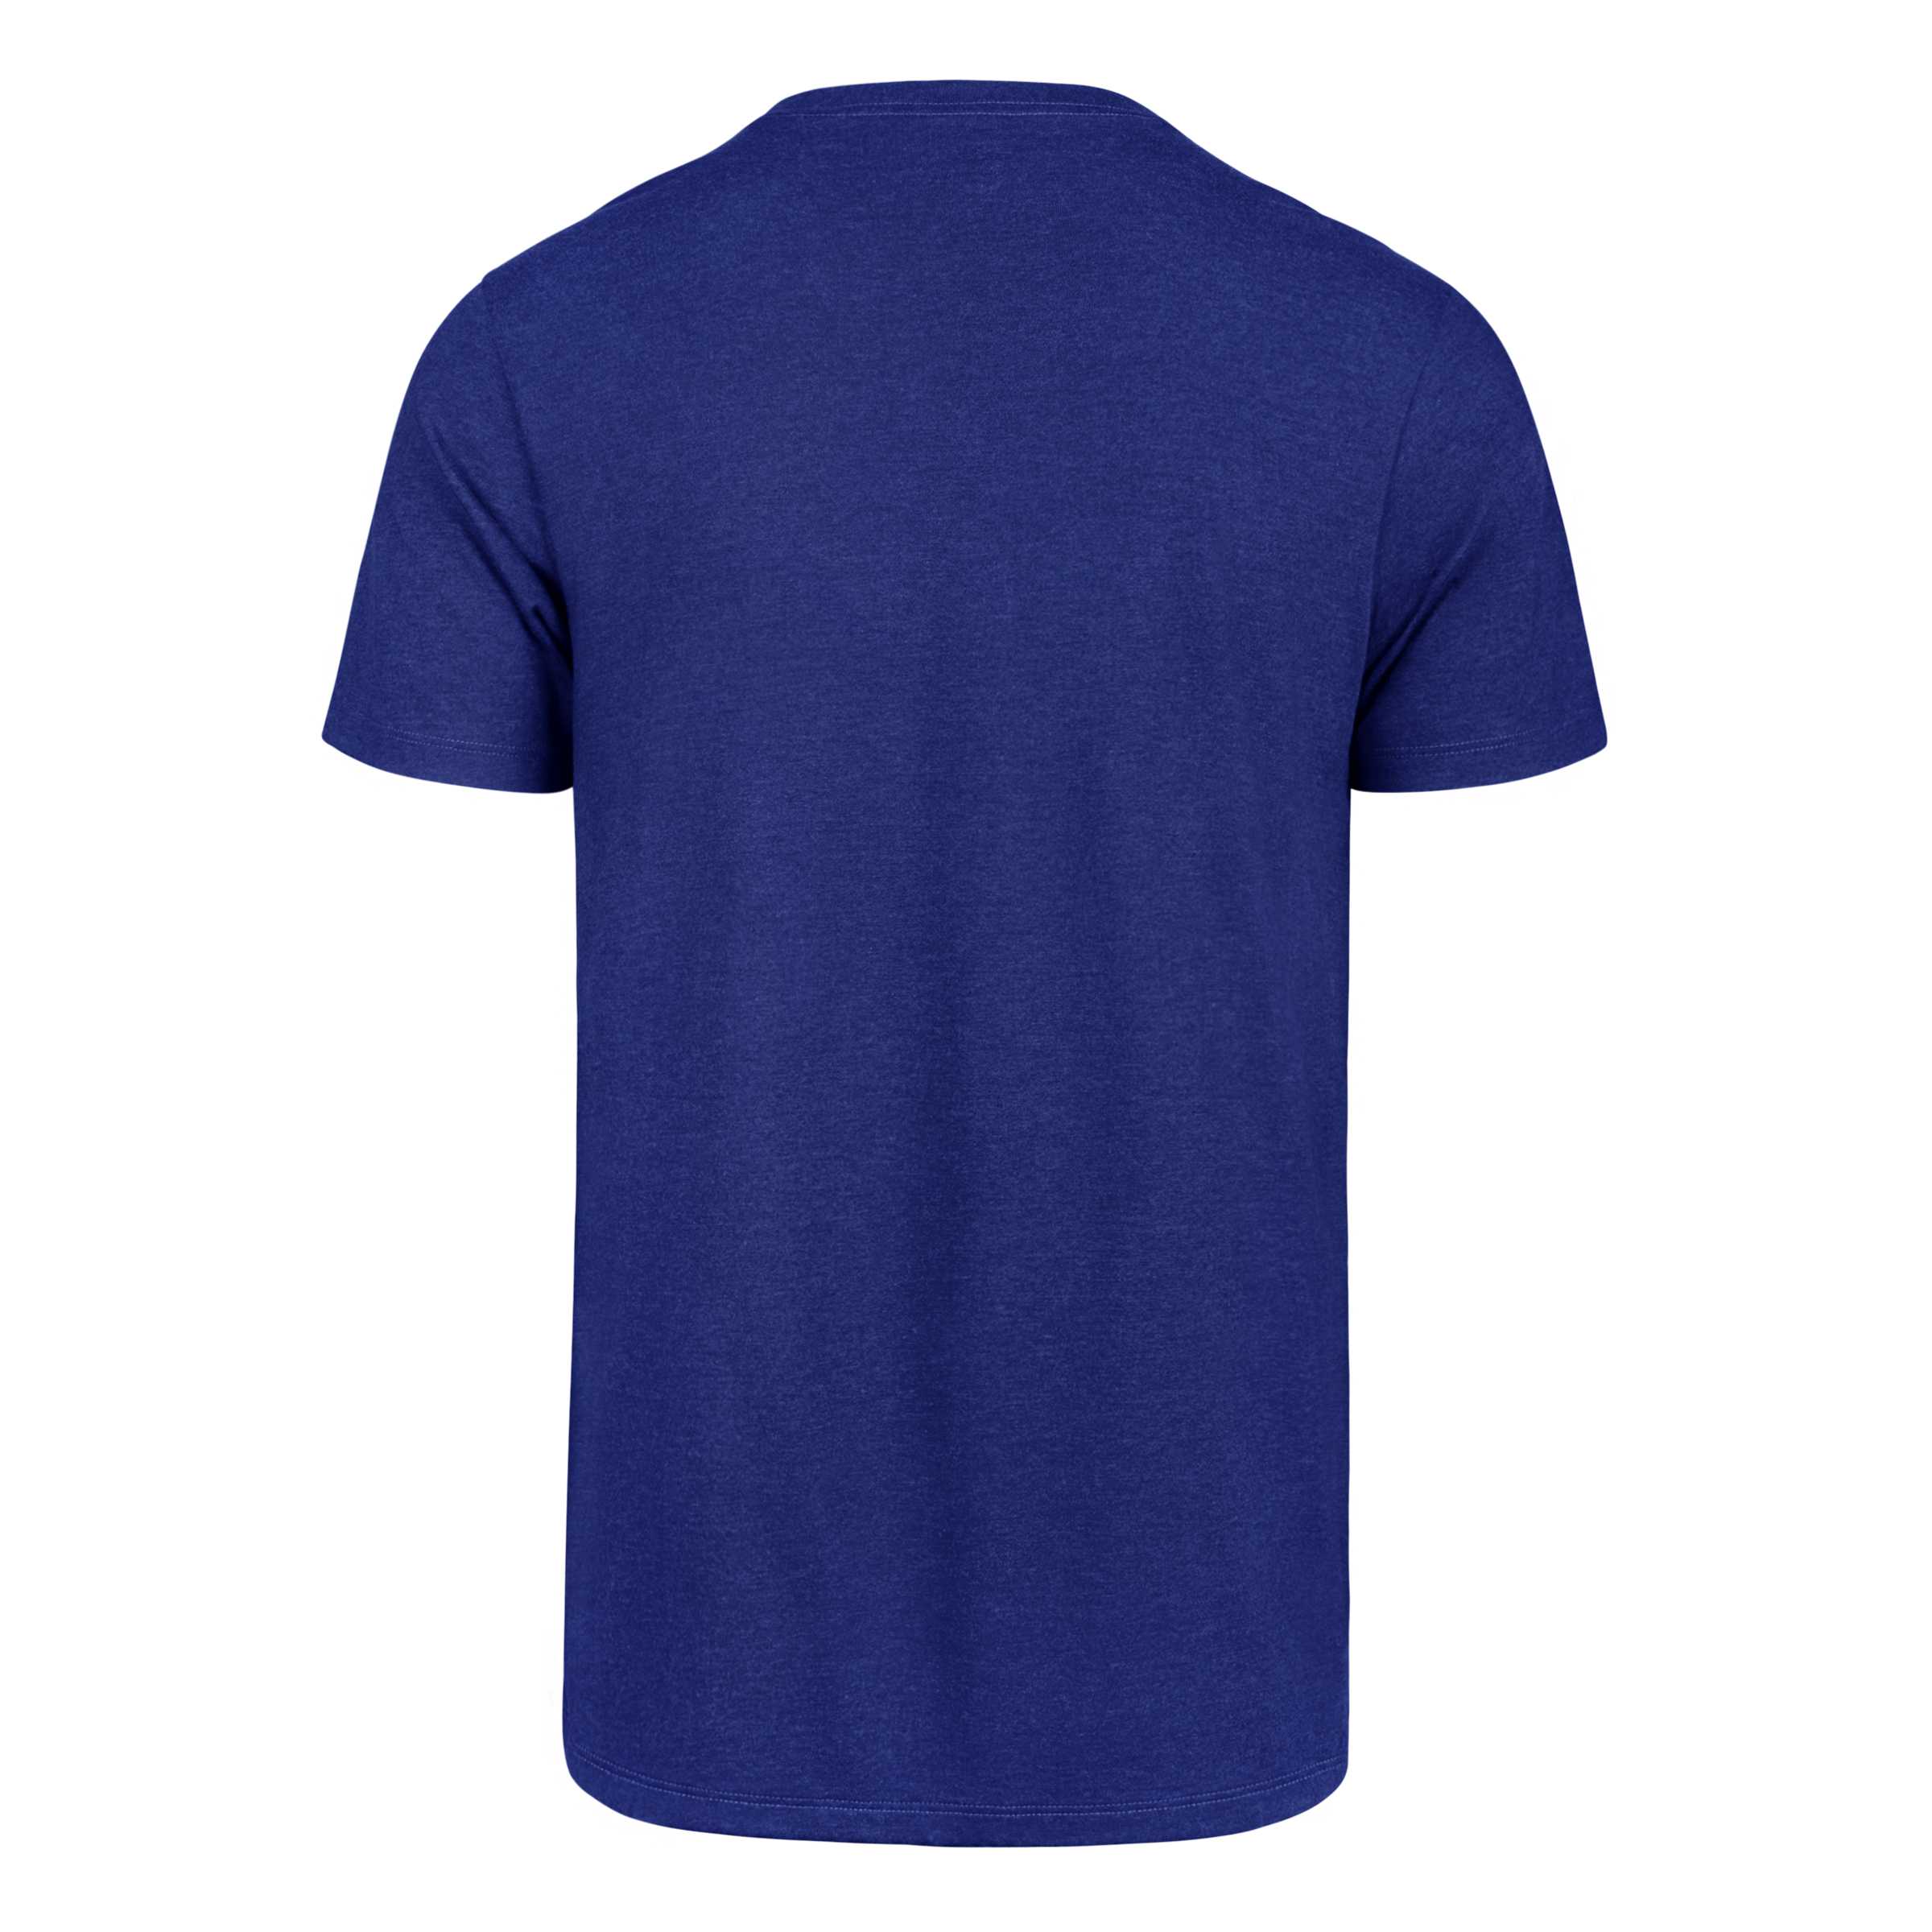 CLUB TEE TEAM COLORS-Golden State Warriors